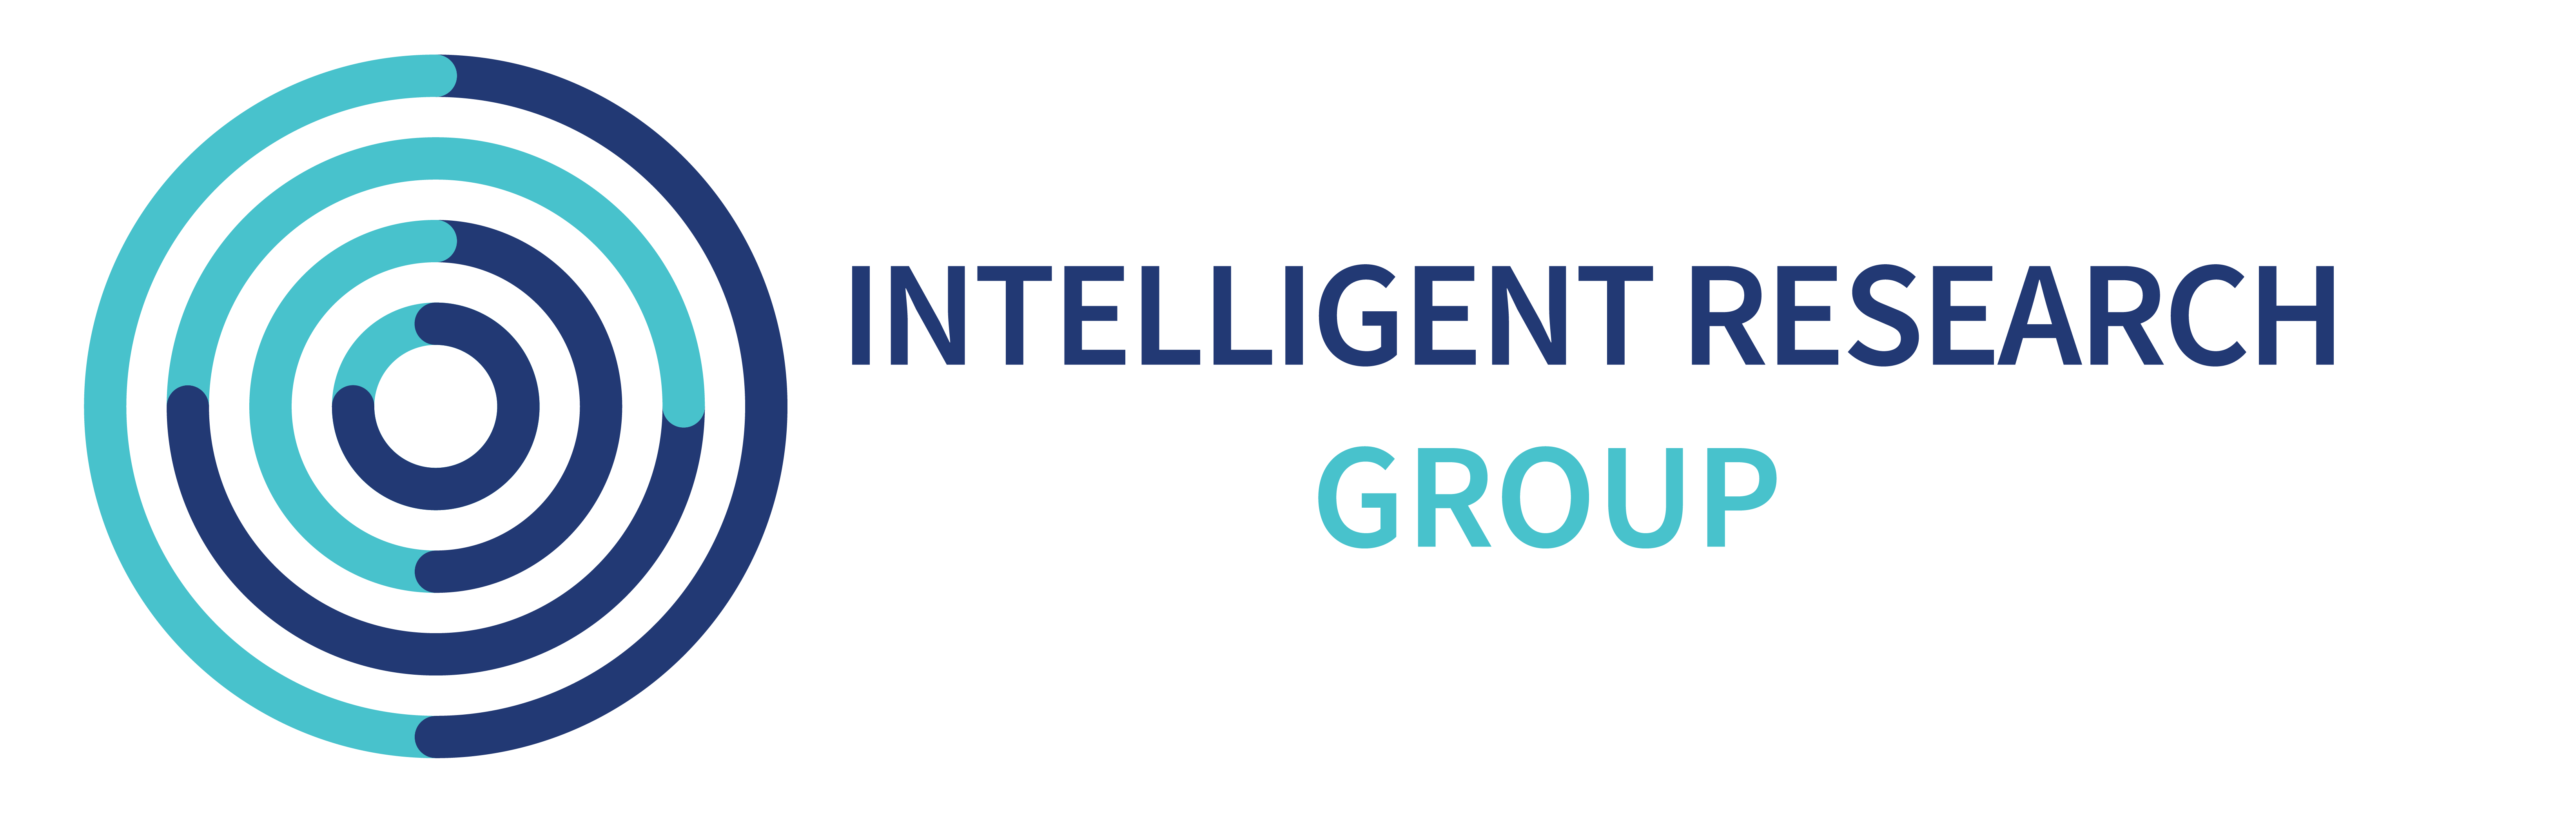 Intelligent Research Group